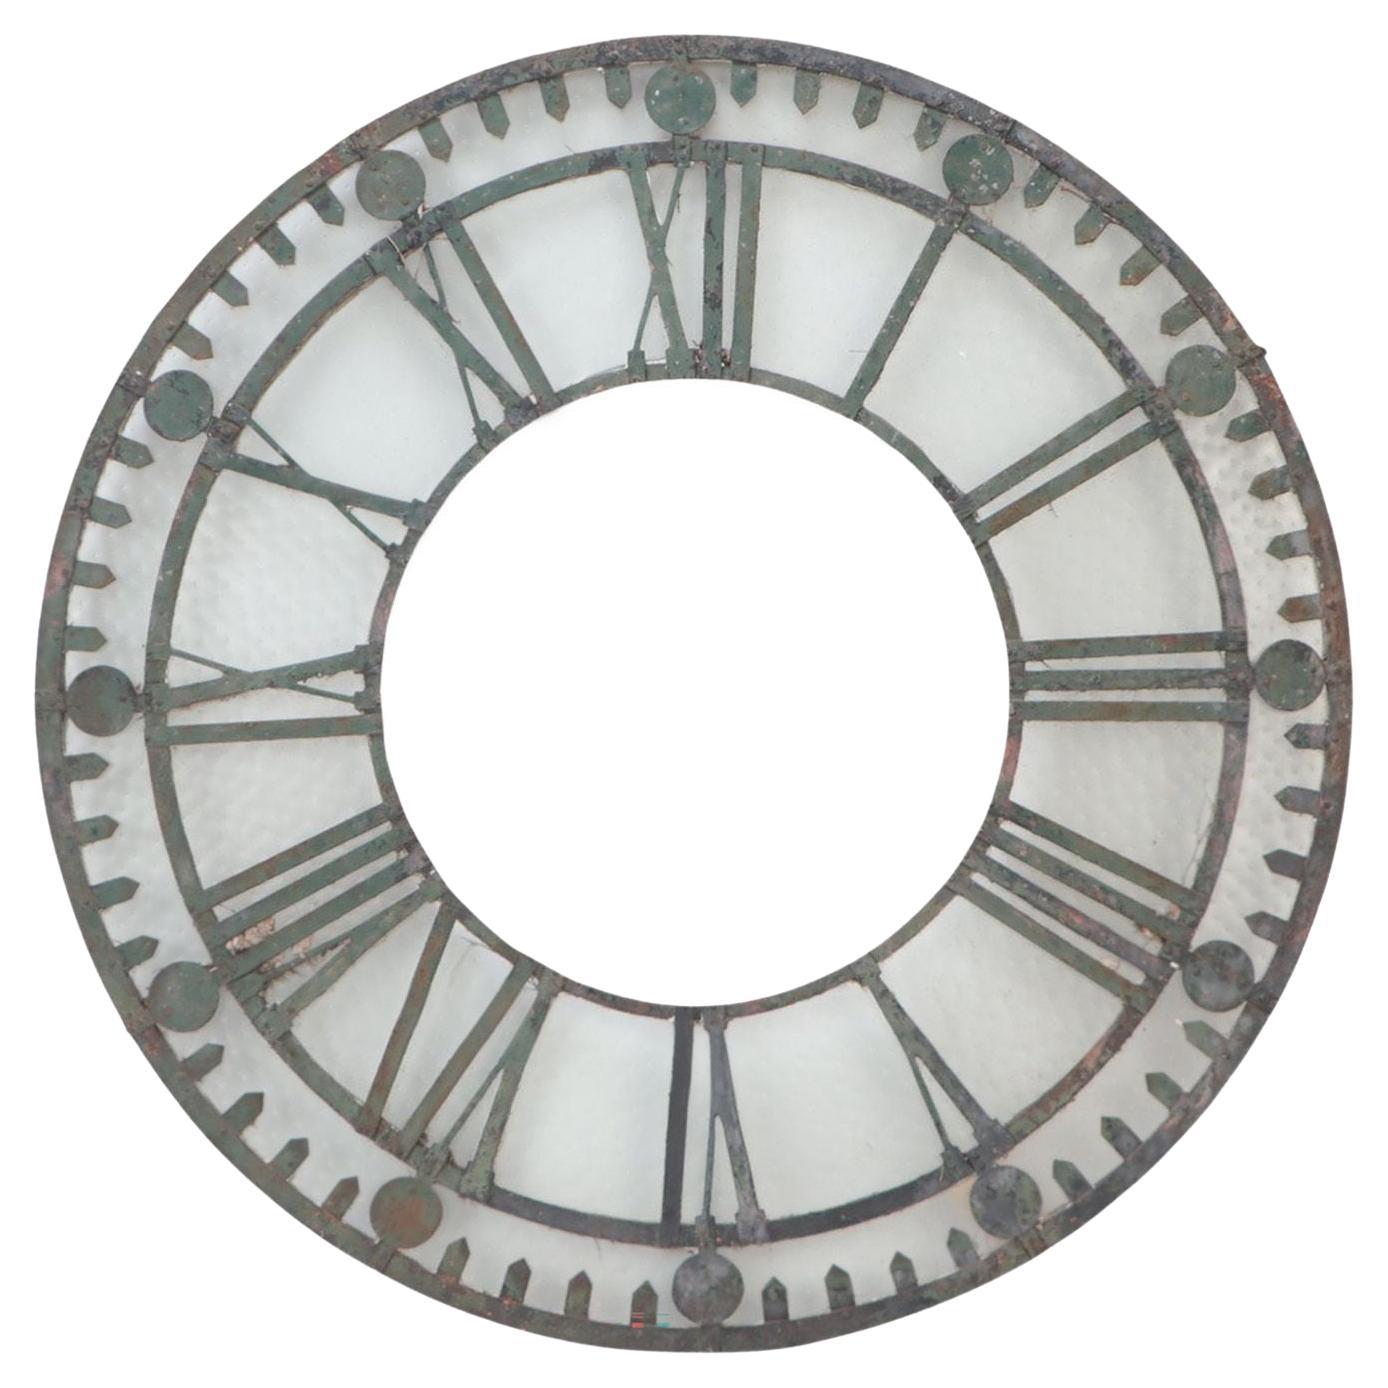 Early 20th C Cast Iron and Glass Clock Face Ornament, circa 1900